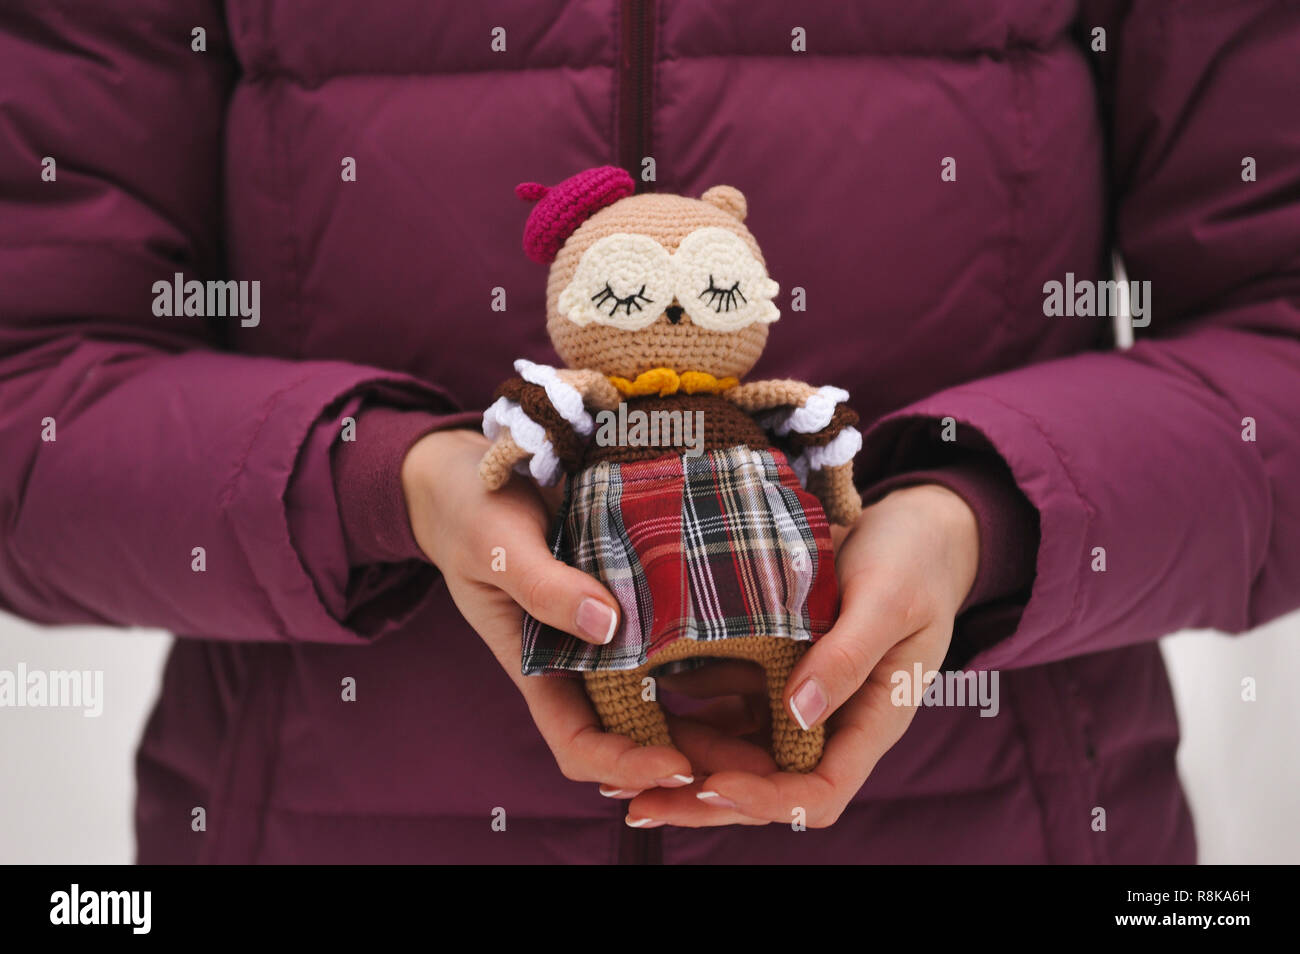 SYKTYVKAR, RUSSIA - DECEMBER 16, 2018: Illustrative image. Sleeping owl toy knitted in the technique of knitting amigurumi Stock Photo